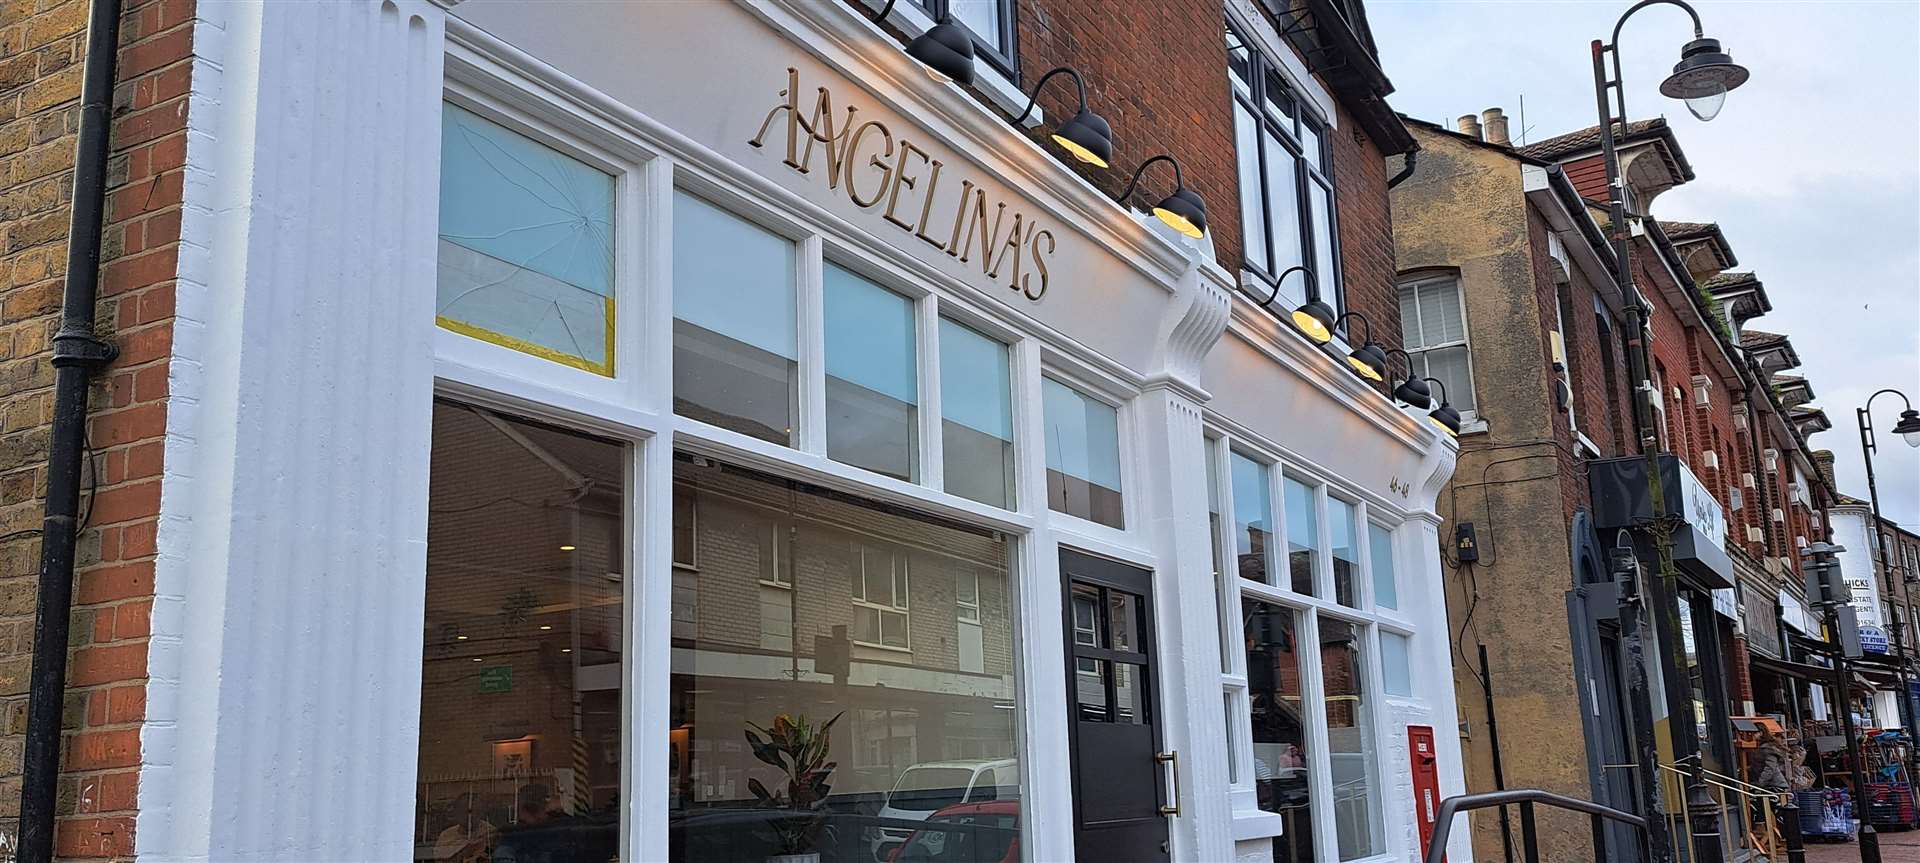 Angelina's, High Street, Snodland. A British and Mediterranean restaurant has opened in one of the former Co-op stores